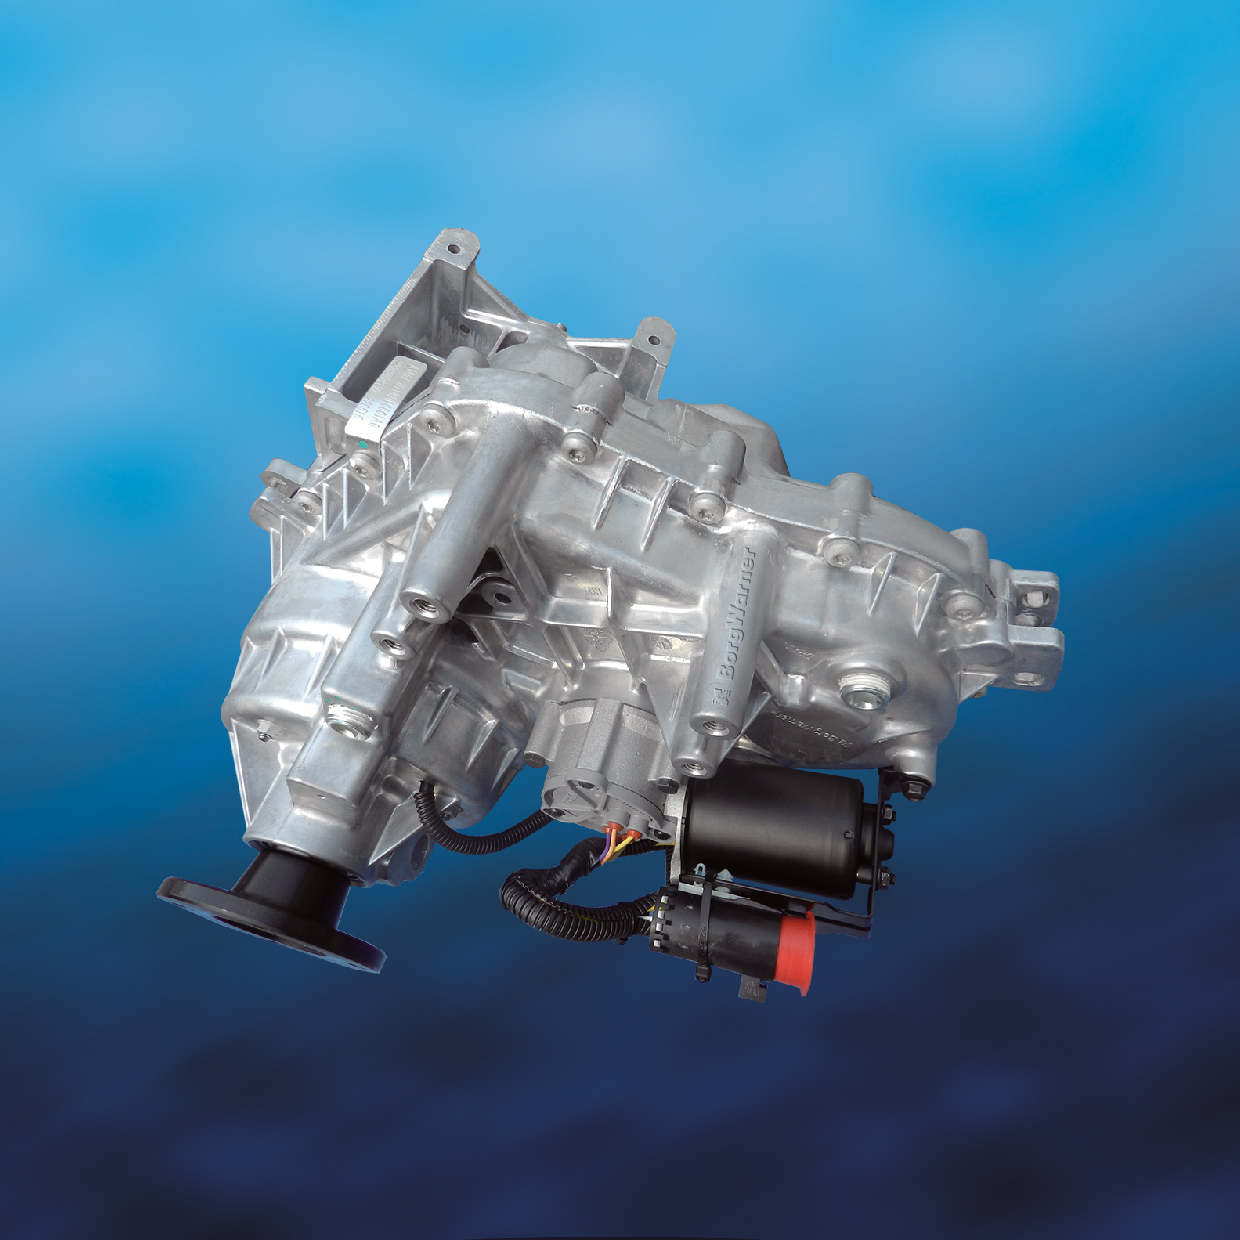 At its manufacturing facility in Beijing, BorgWarner produces numerous all-wheel drive technologies for the Chinese market, including 2-speed Torque-On-Demand® transfer cases for the new Sauvana SUV from Foton Motor.